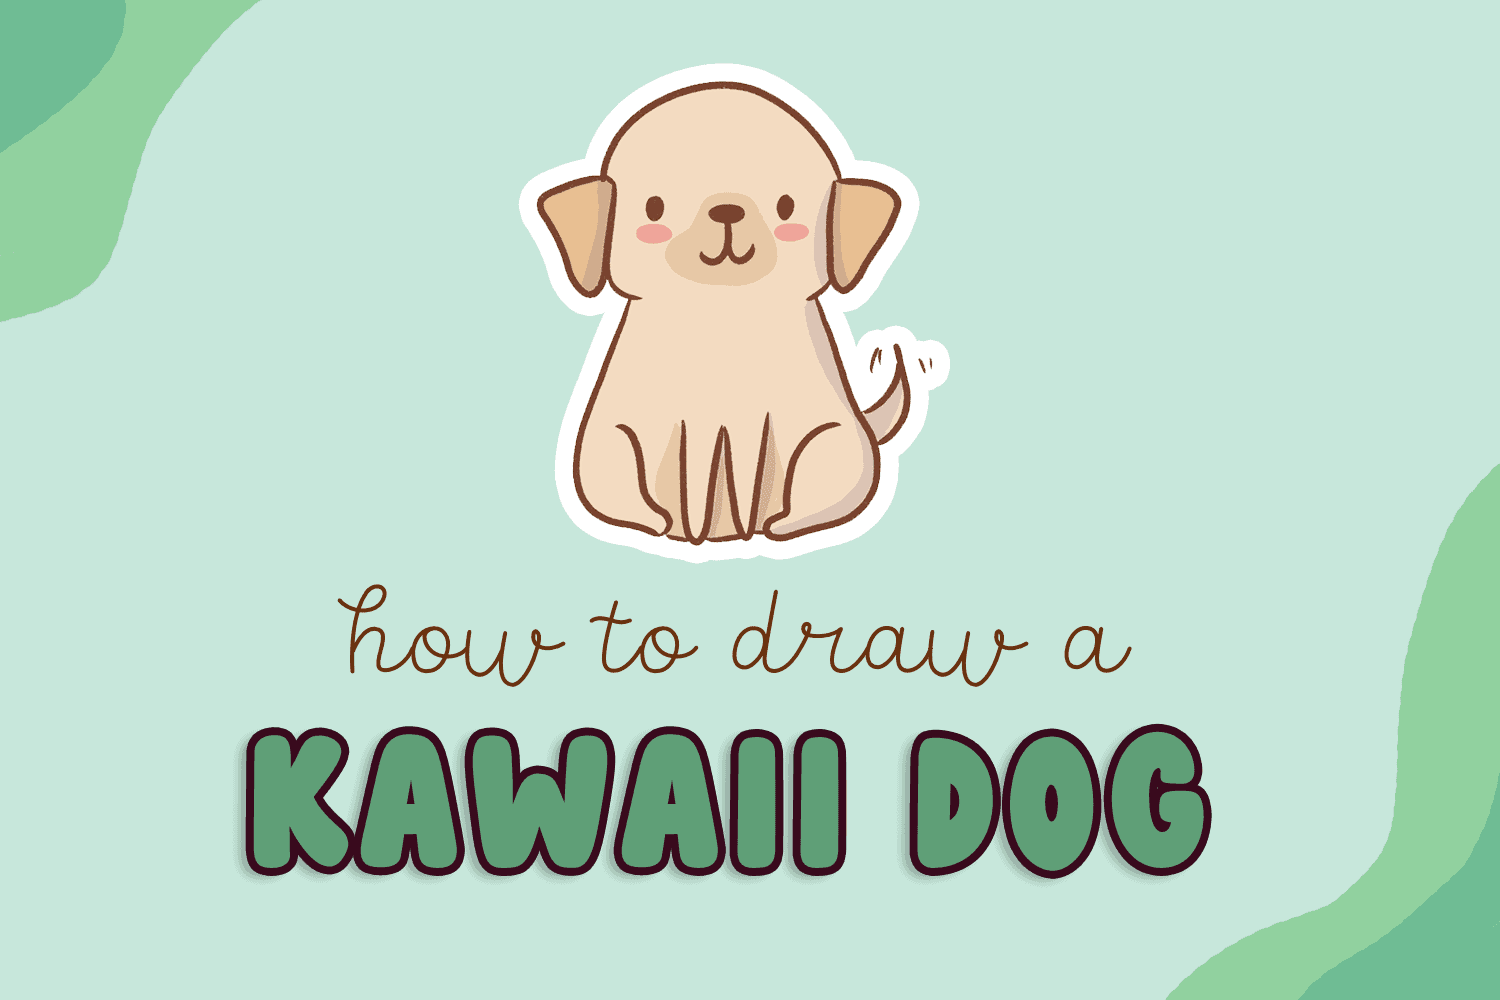 How to Draw a Cute Kawaii Dog - Easy Step by Step Instructions